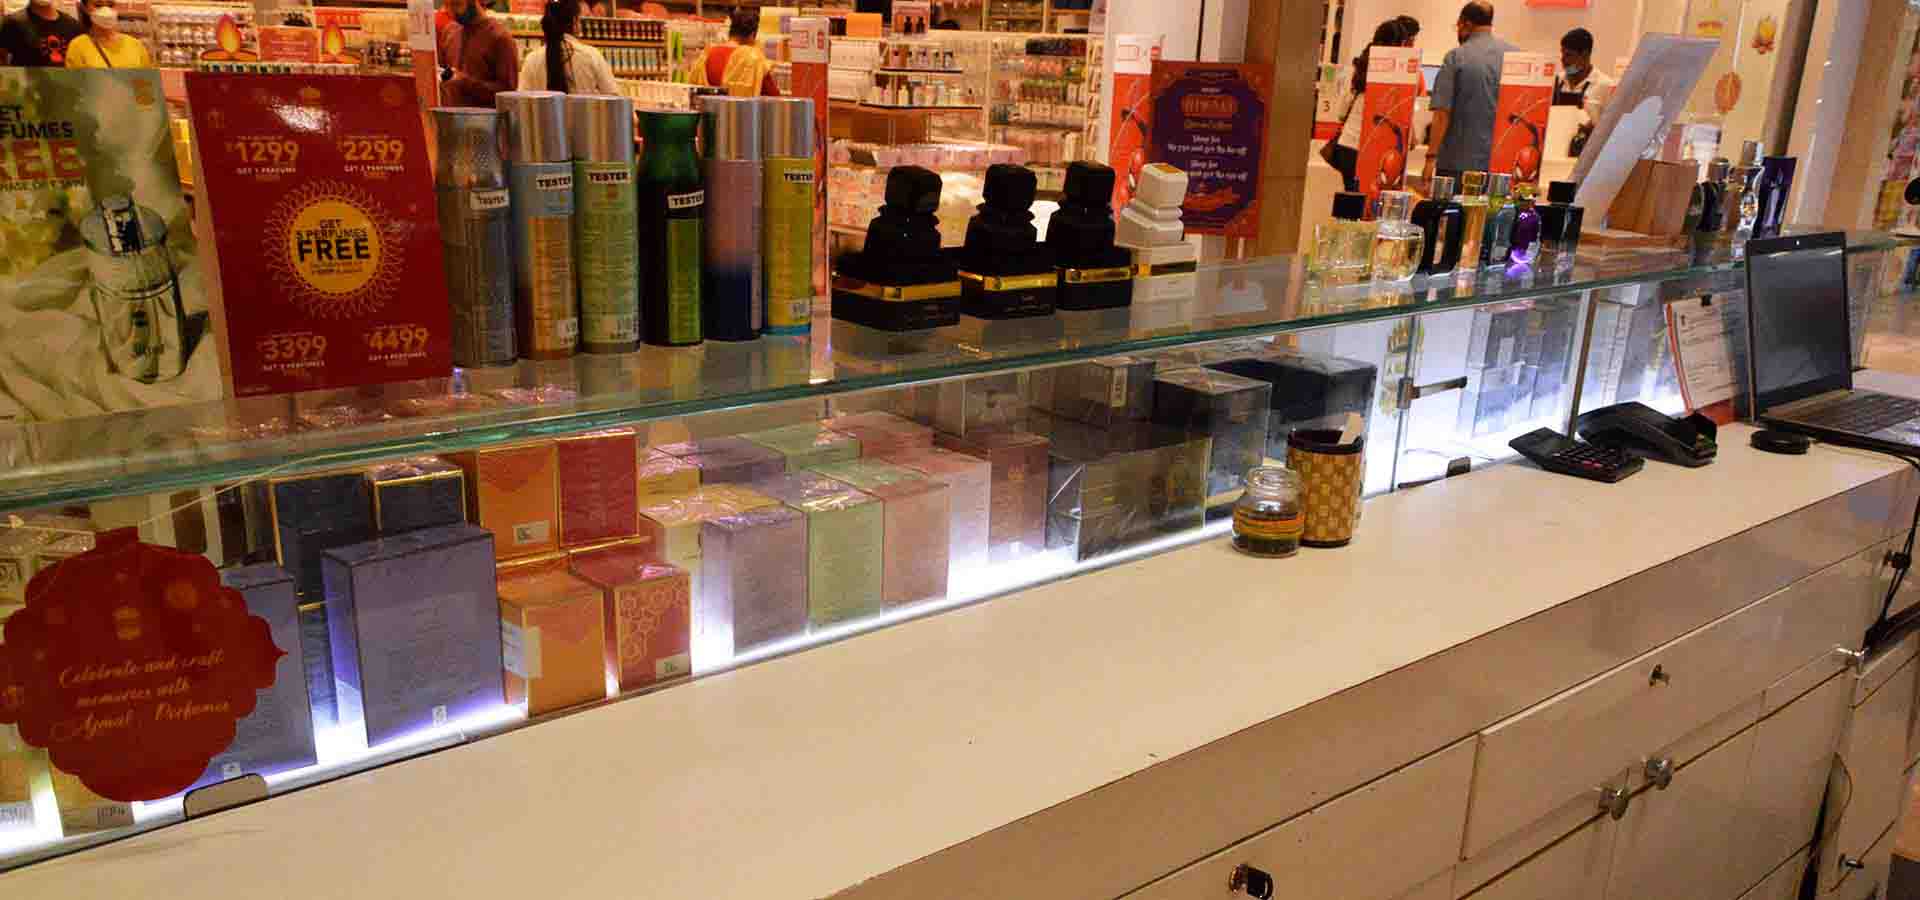 Ajmal Perfume store photos in mall